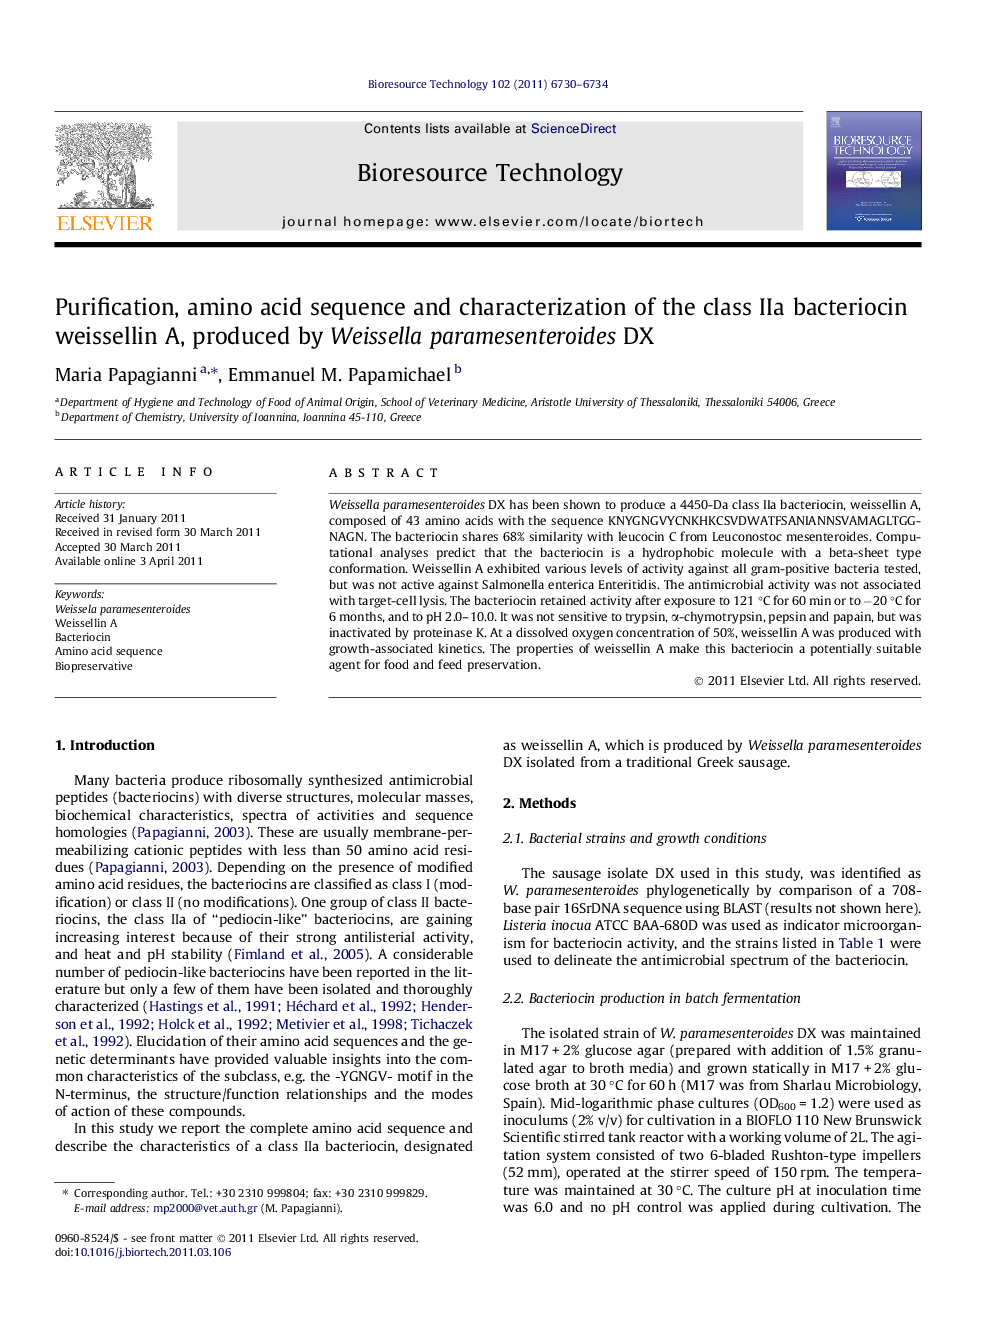 Purification, amino acid sequence and characterization of the class IIa bacteriocin weissellin A, produced by Weissella paramesenteroides DX